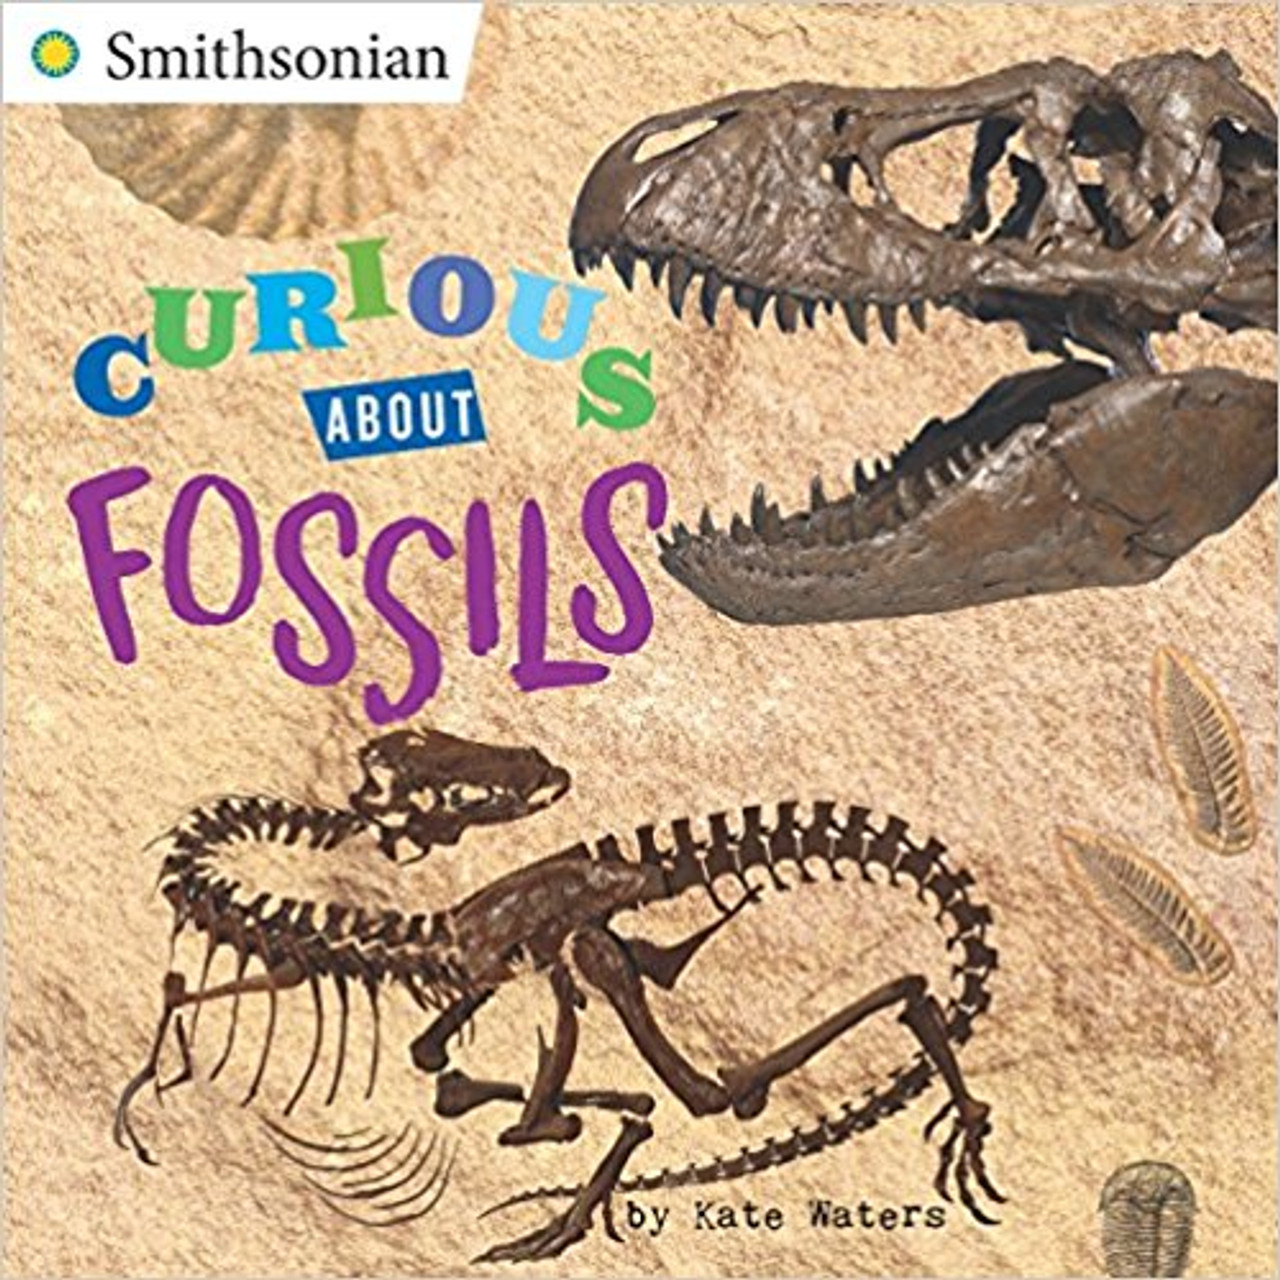 Curious about Fossils by Kate Waters